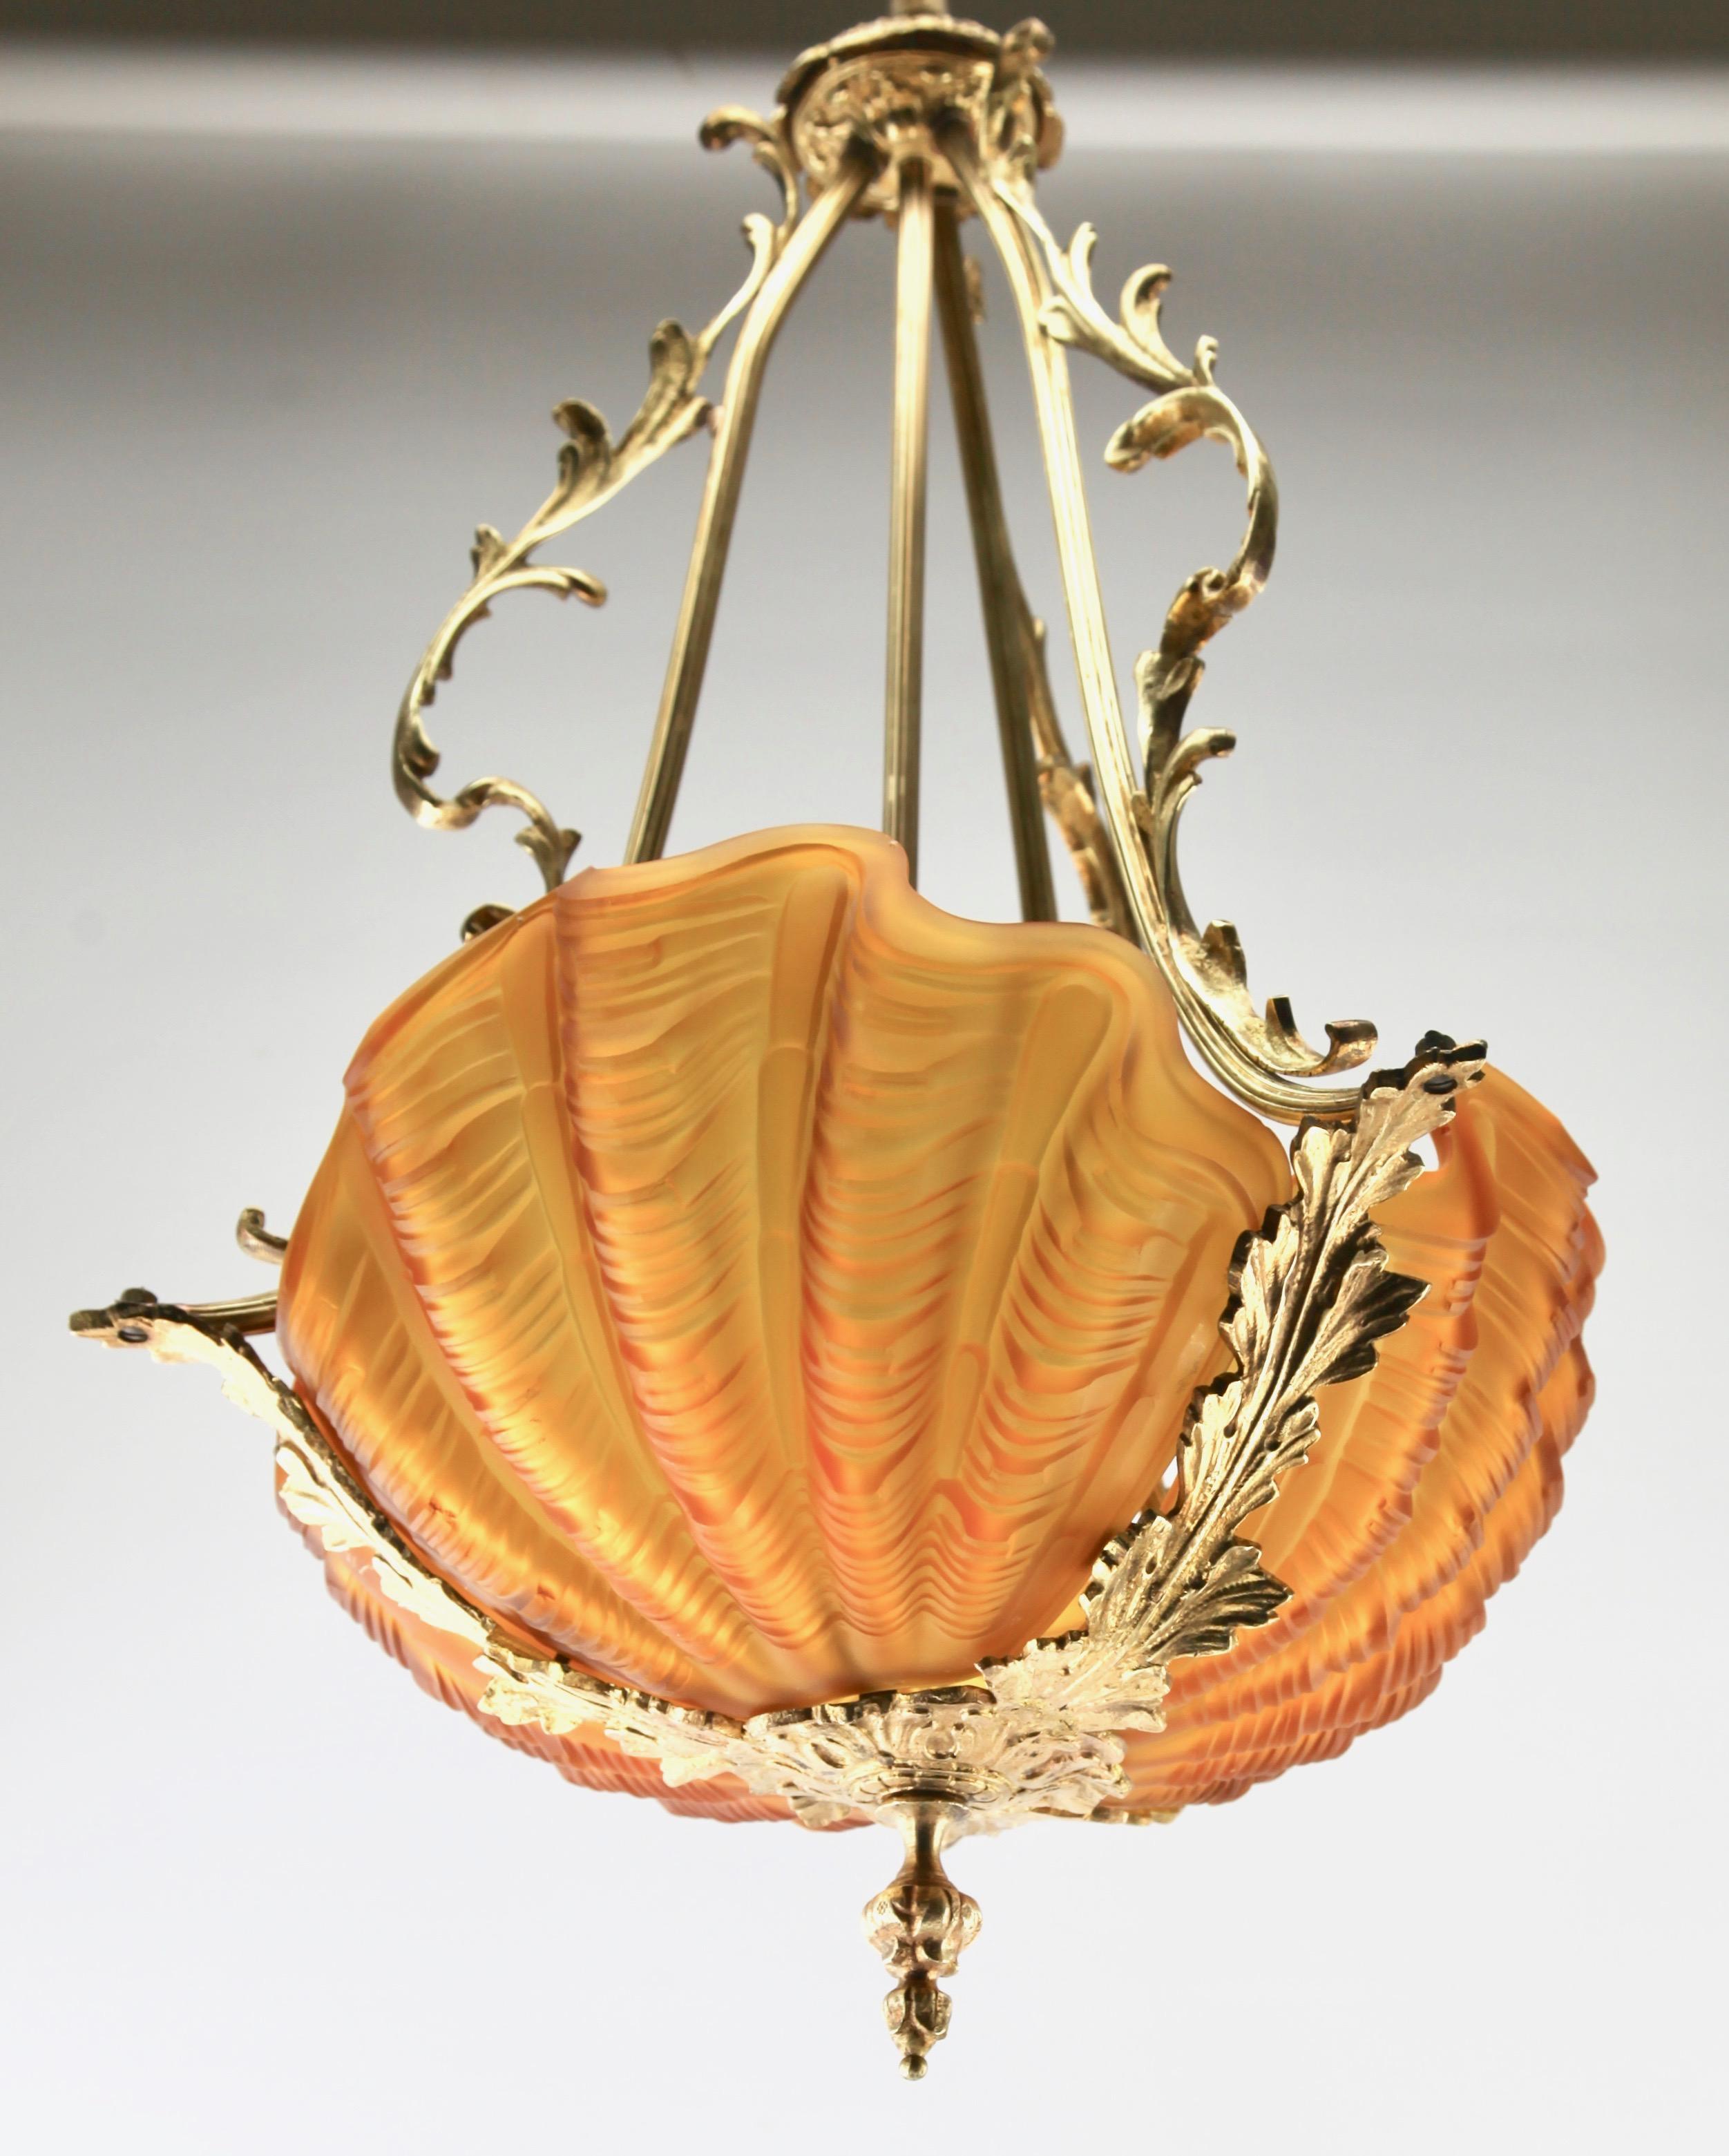 Early 20th Century Art Nouveau Central Pendant Lamp Whit Three Clam Shells and Framework of Brass